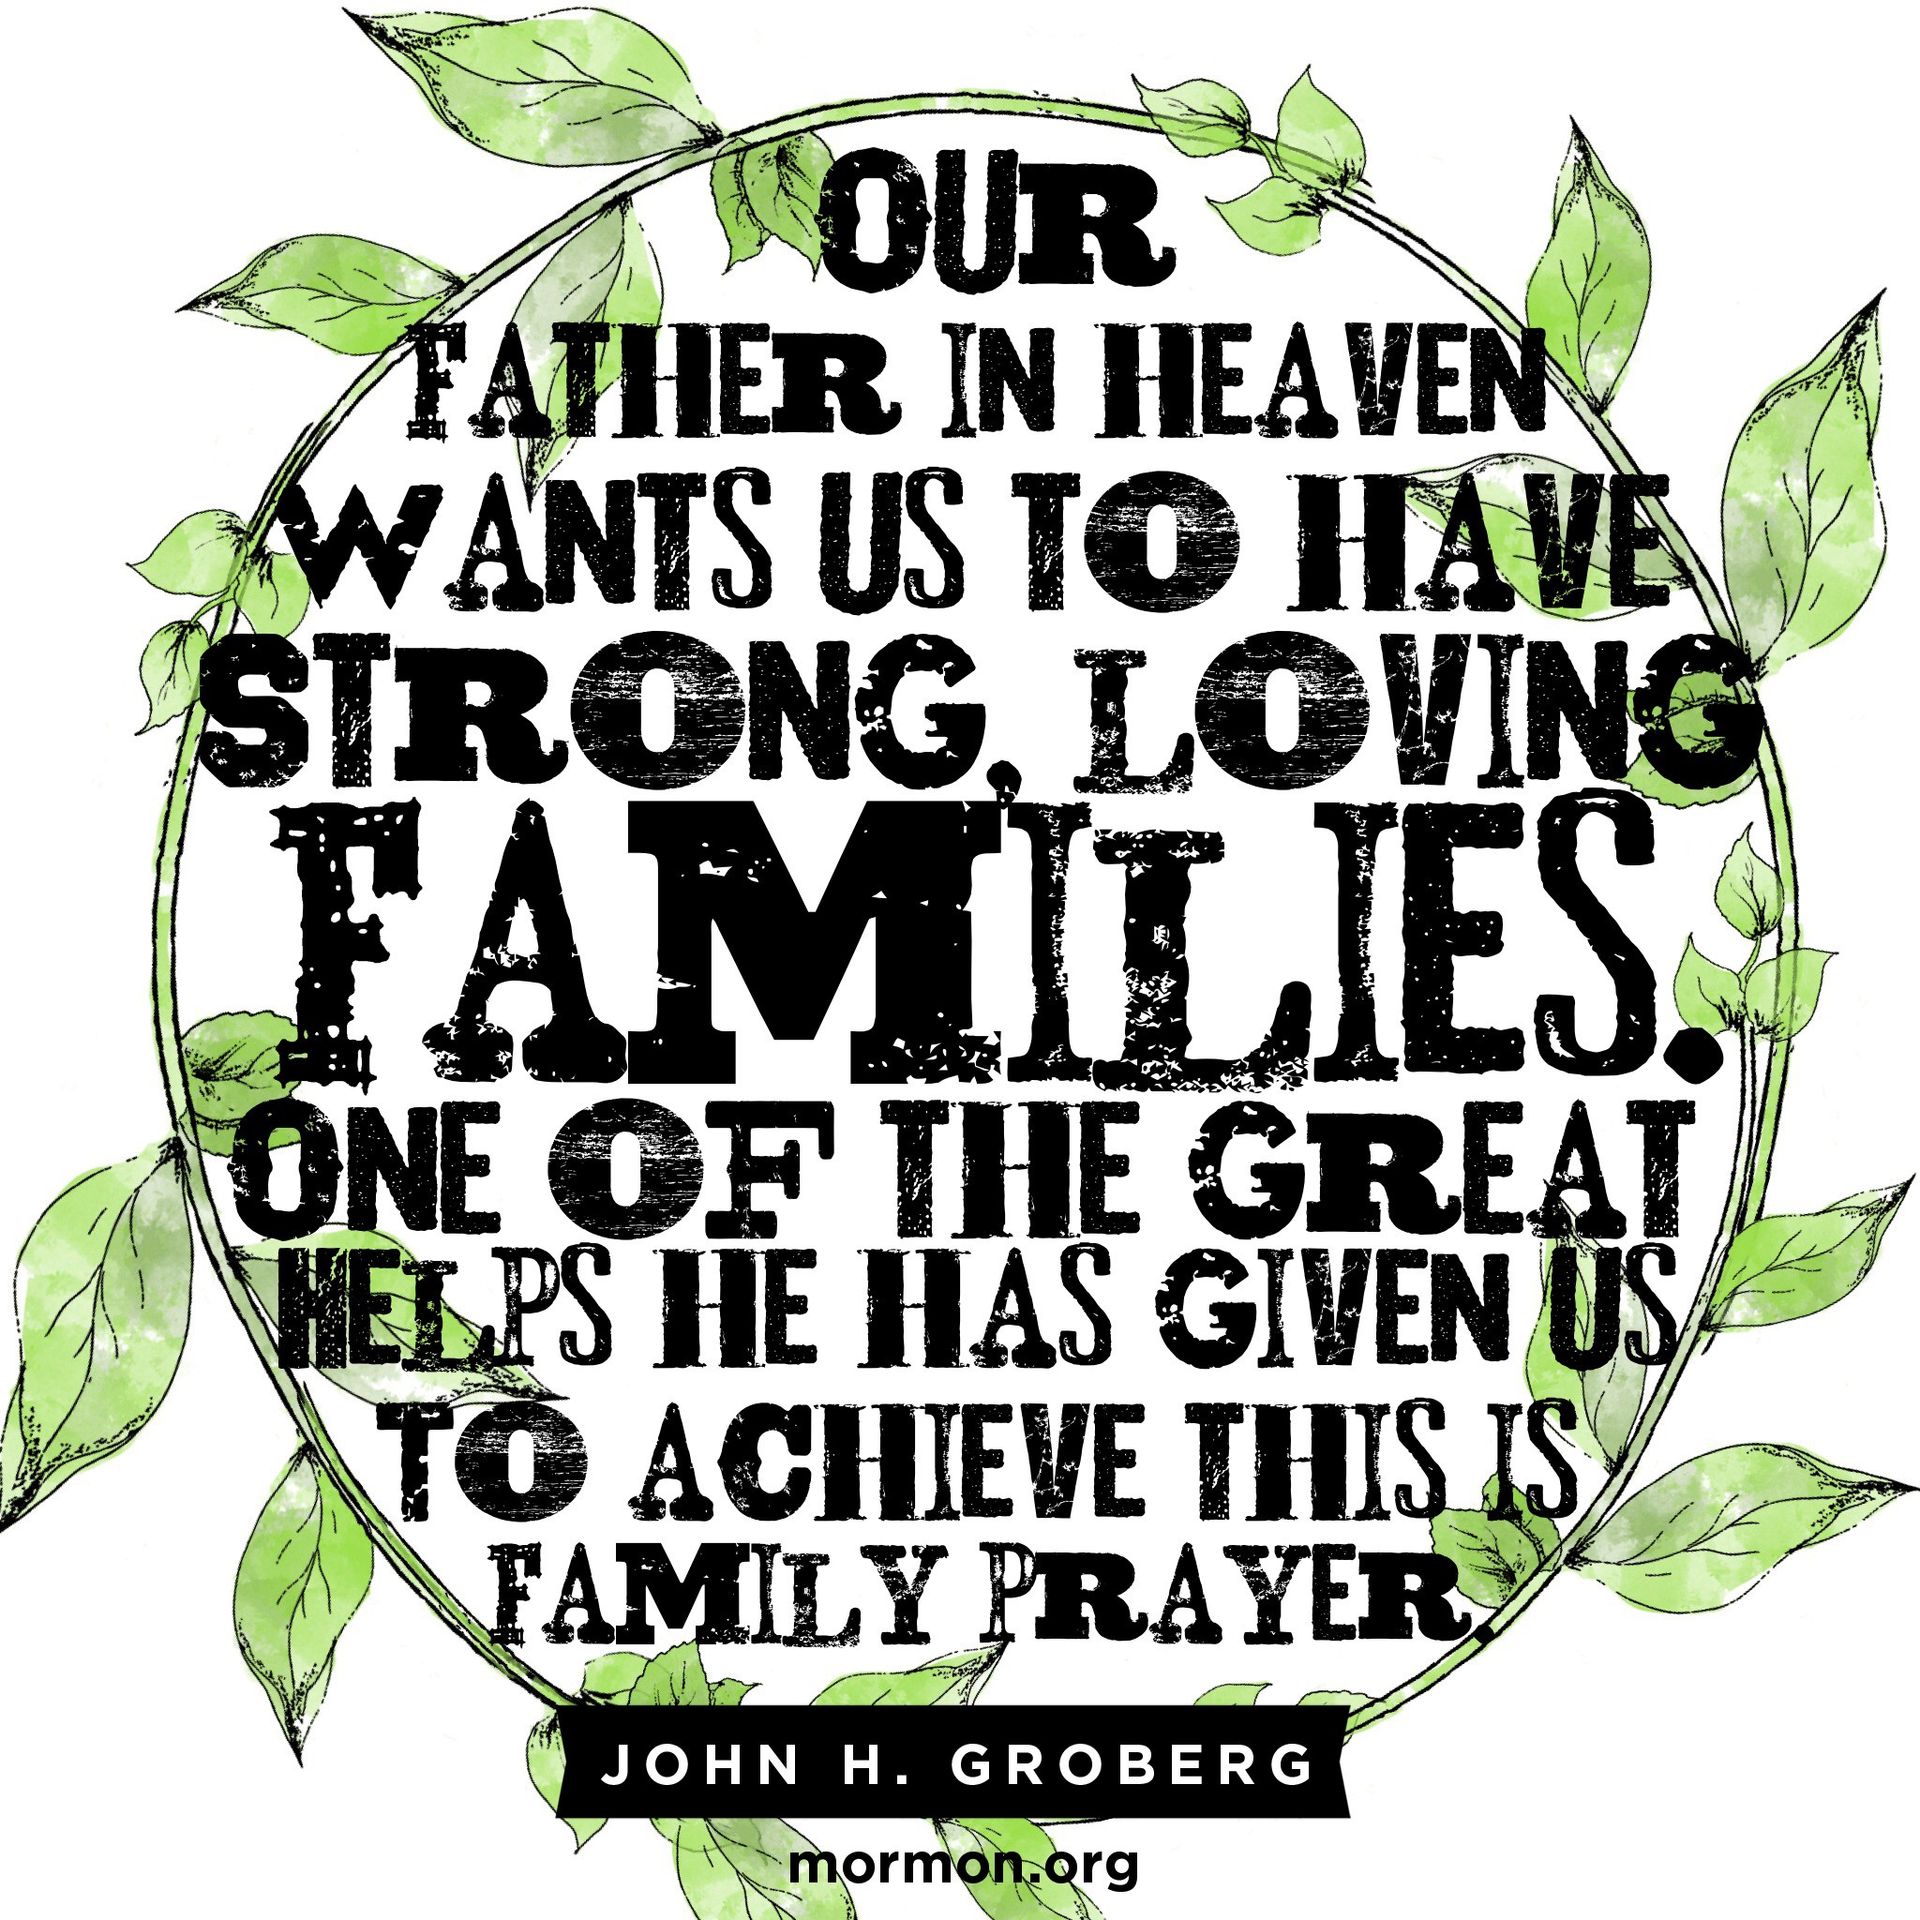 “Our Father in Heaven wants us to have strong, loving families. One of the great helps he has given us to achieve this is family prayer.”—Elder John H. Groberg, “The Power of Family Prayer”